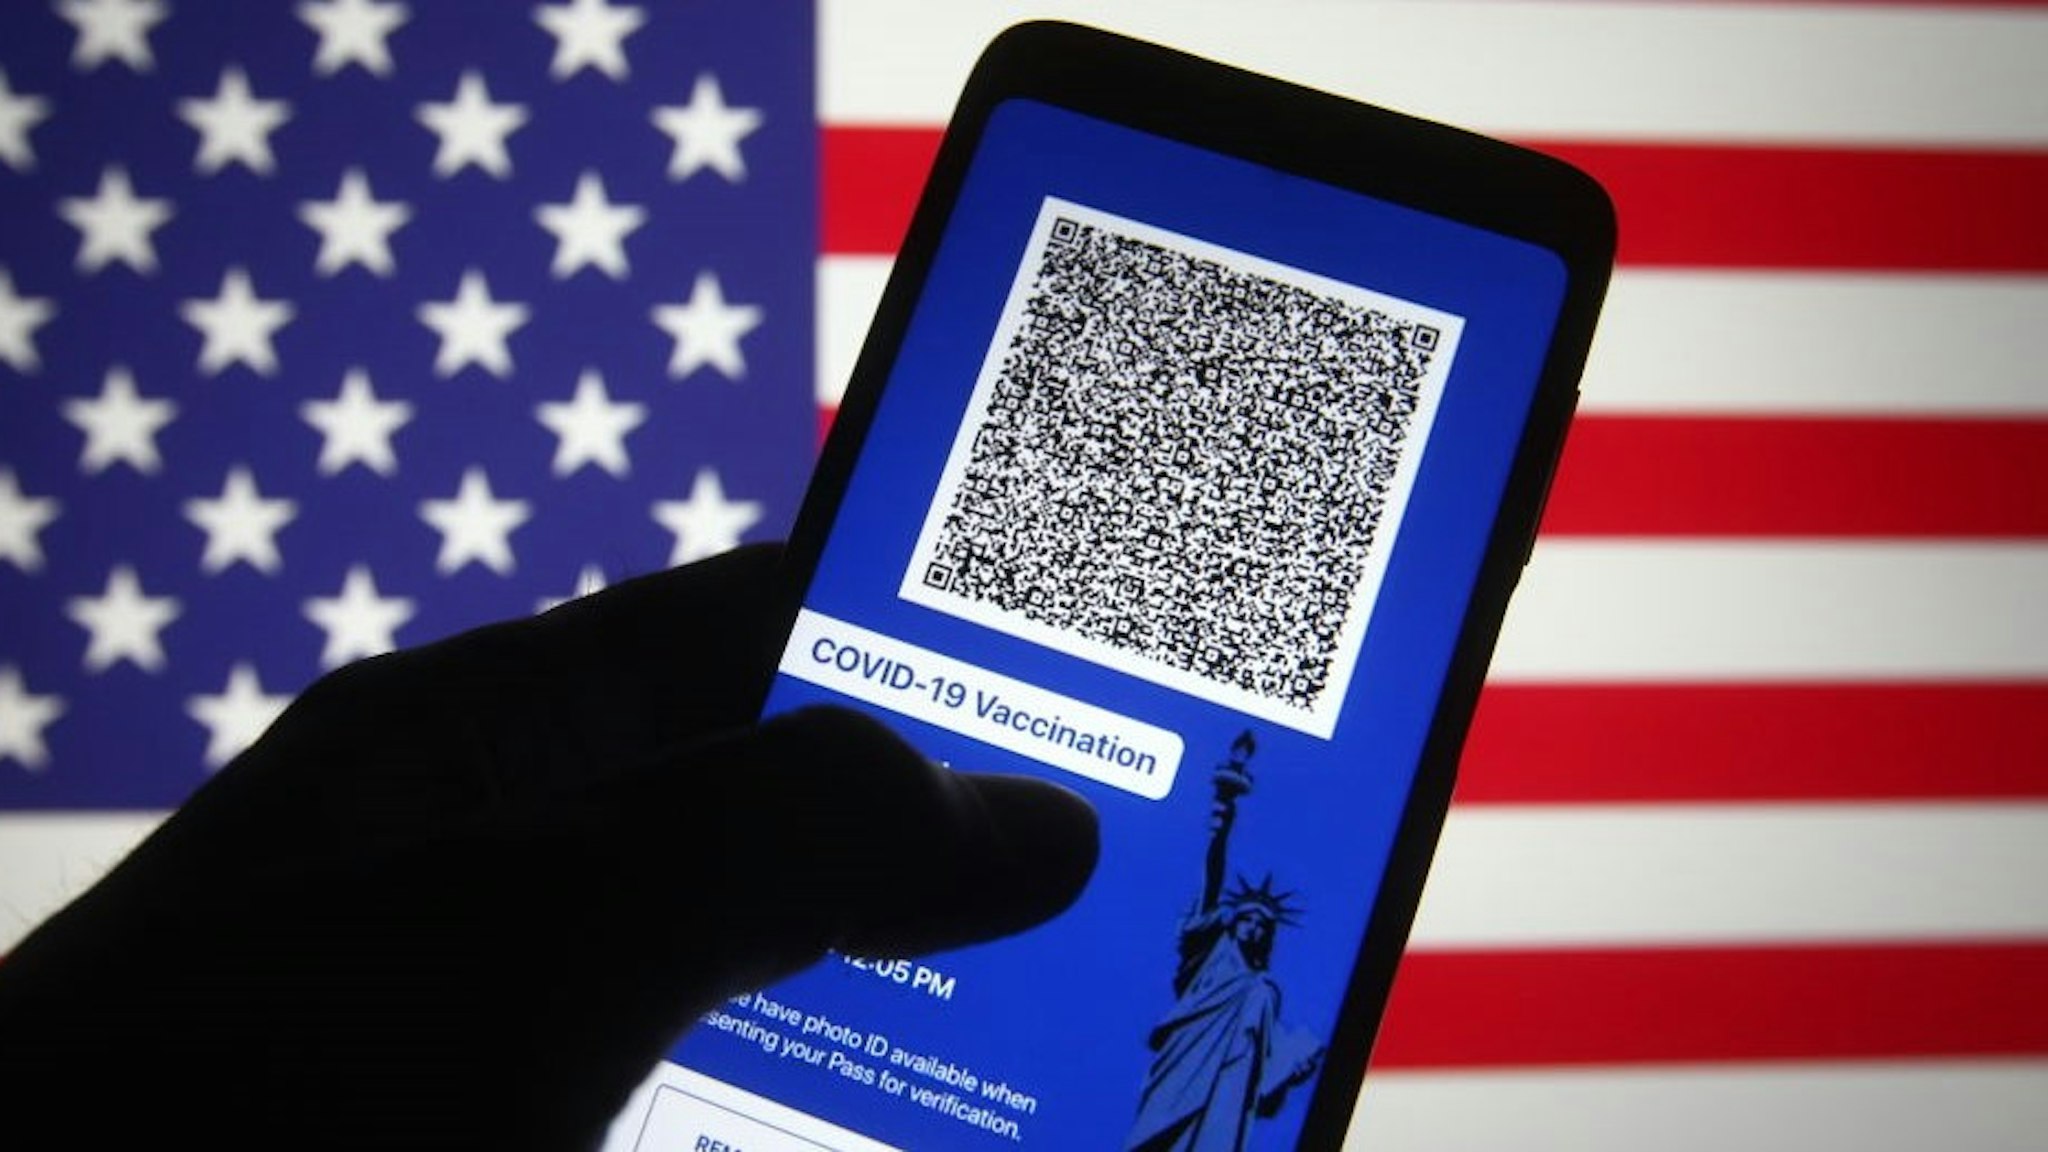 UKRAINE - 2021/03/28: In this photo illustration, Excelsior Pass app which provides digital proof of COVID-19 vaccination or negative test results seen displayed on a smartphone screen in front of the US flag. The first COVID-19 vaccine passports' in the US called the Excelsior Pass was launched on Friday in New York, reportedly by the media on 27 March. Excelsior Pass provides digital proof of COVID-19 vaccination or negative test results of three types of passes: COVID-19 Vaccination Pass, COVID-19 PCR Test Pass, and COVID-19 Antigen Test Pass. (Photo Illustration by